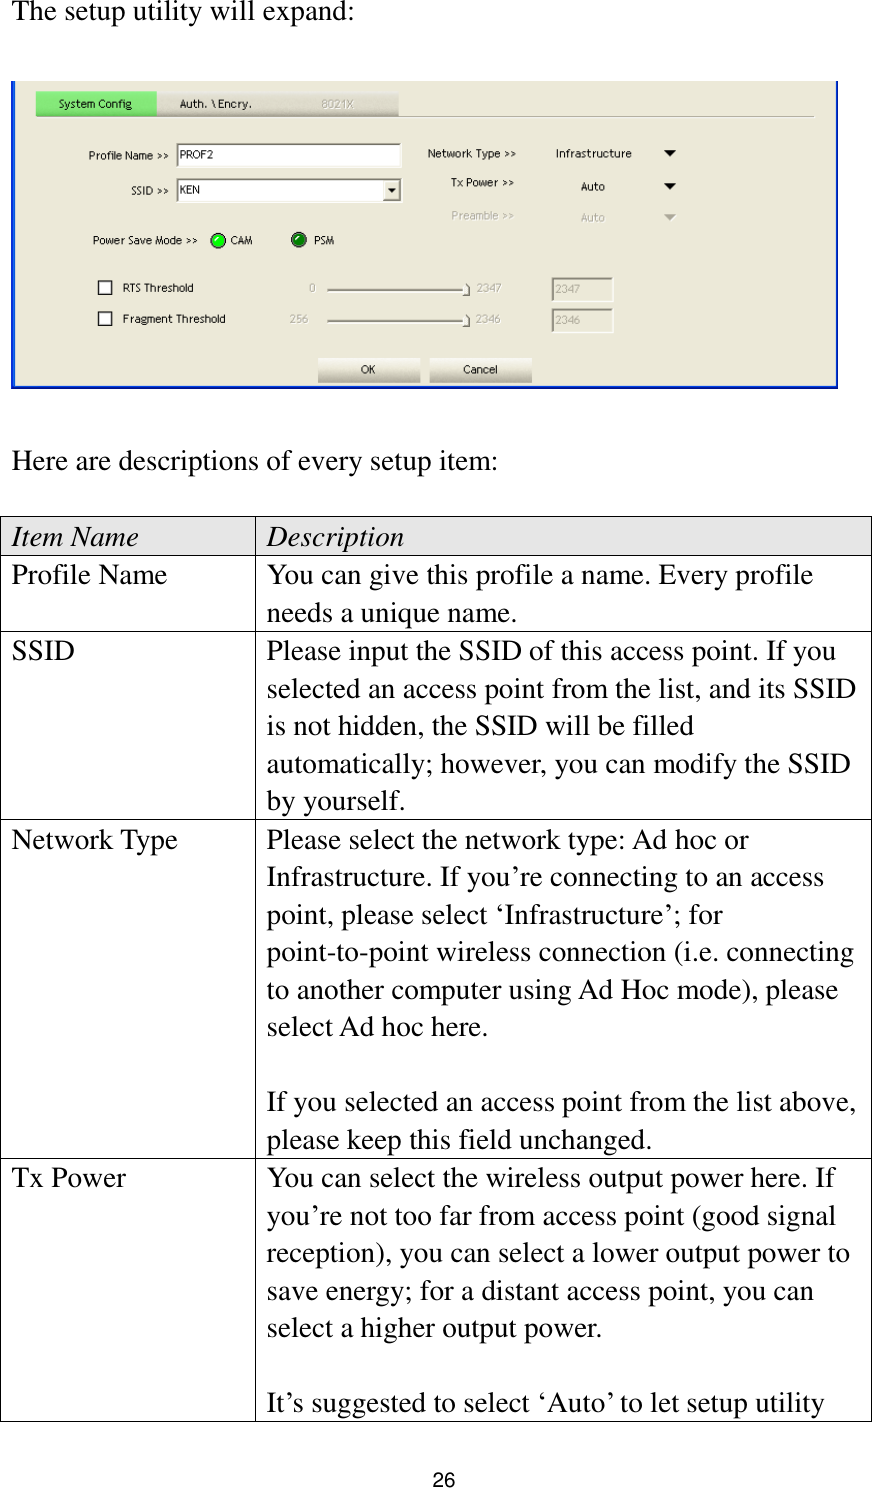  26 The setup utility will expand:    Here are descriptions of every setup item:  Item Name Description Profile Name You can give this profile a name. Every profile needs a unique name. SSID Please input the SSID of this access point. If you selected an access point from the list, and its SSID is not hidden, the SSID will be filled automatically; however, you can modify the SSID by yourself. Network Type Please select the network type: Ad hoc or Infrastructure. If you‟re connecting to an access point, please select „Infrastructure‟; for point-to-point wireless connection (i.e. connecting to another computer using Ad Hoc mode), please select Ad hoc here.  If you selected an access point from the list above, please keep this field unchanged. Tx Power You can select the wireless output power here. If you‟re not too far from access point (good signal reception), you can select a lower output power to save energy; for a distant access point, you can select a higher output power.    It‟s suggested to select „Auto‟ to let setup utility 